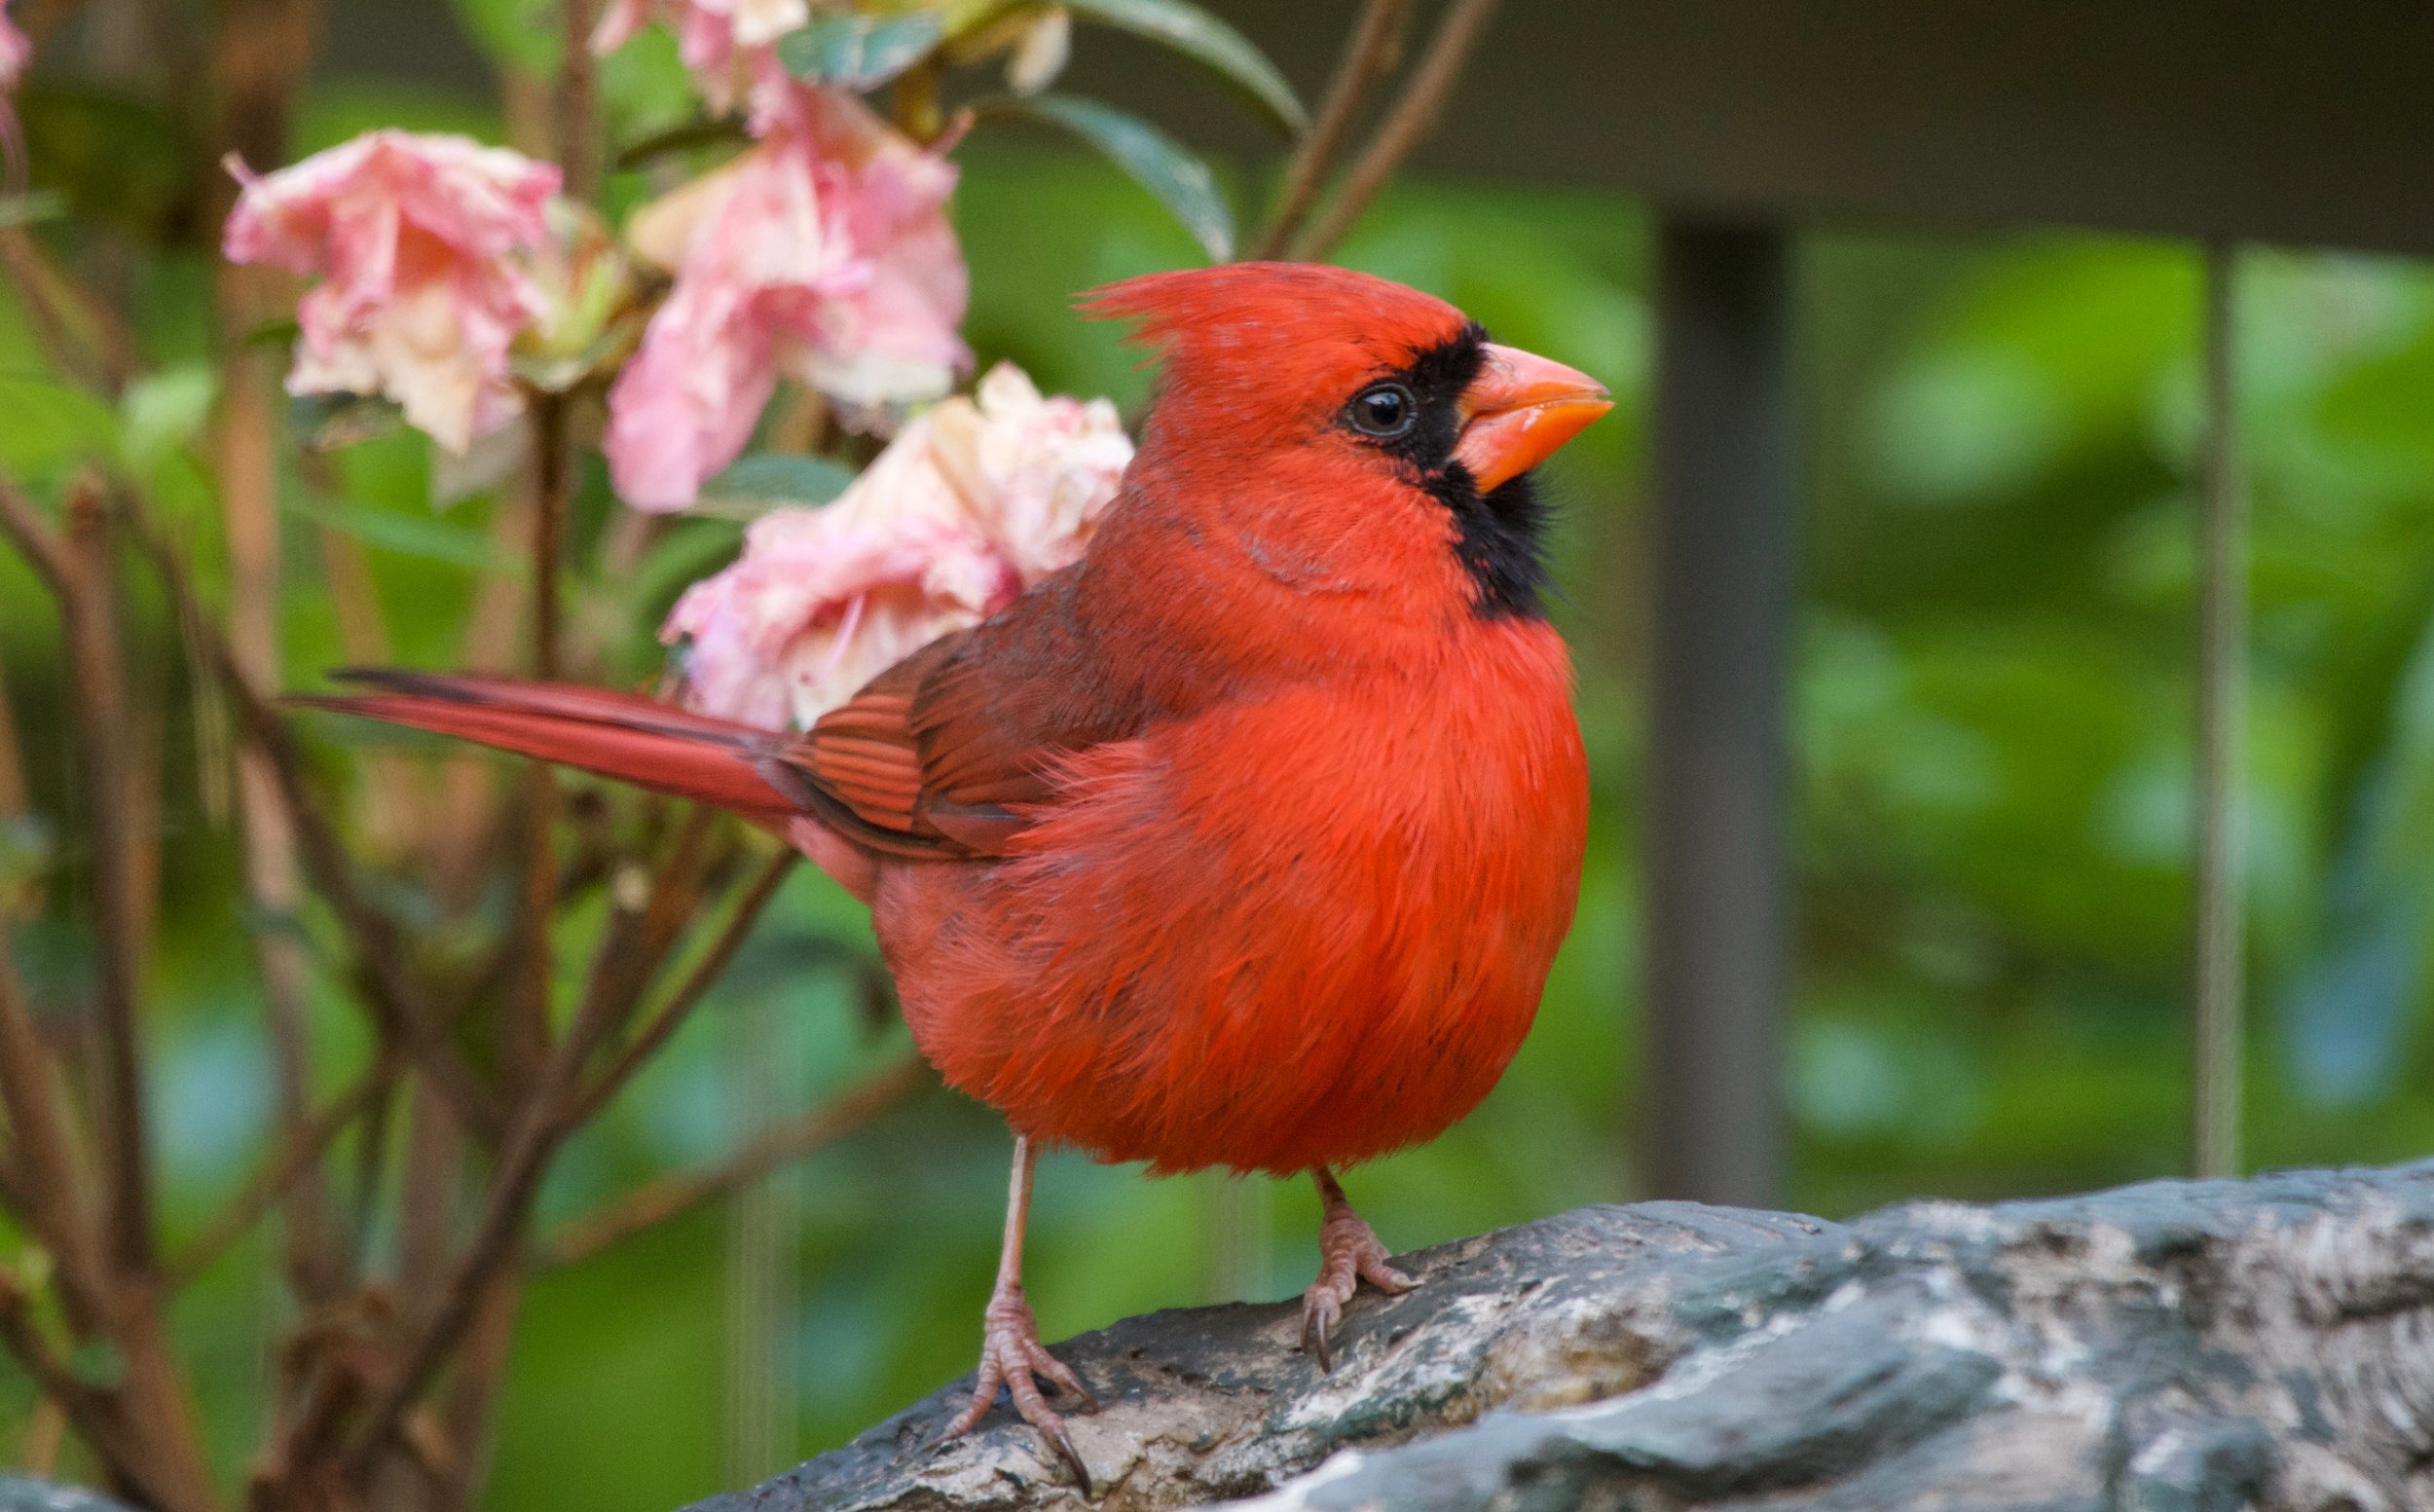 Northern Cardinal after molting